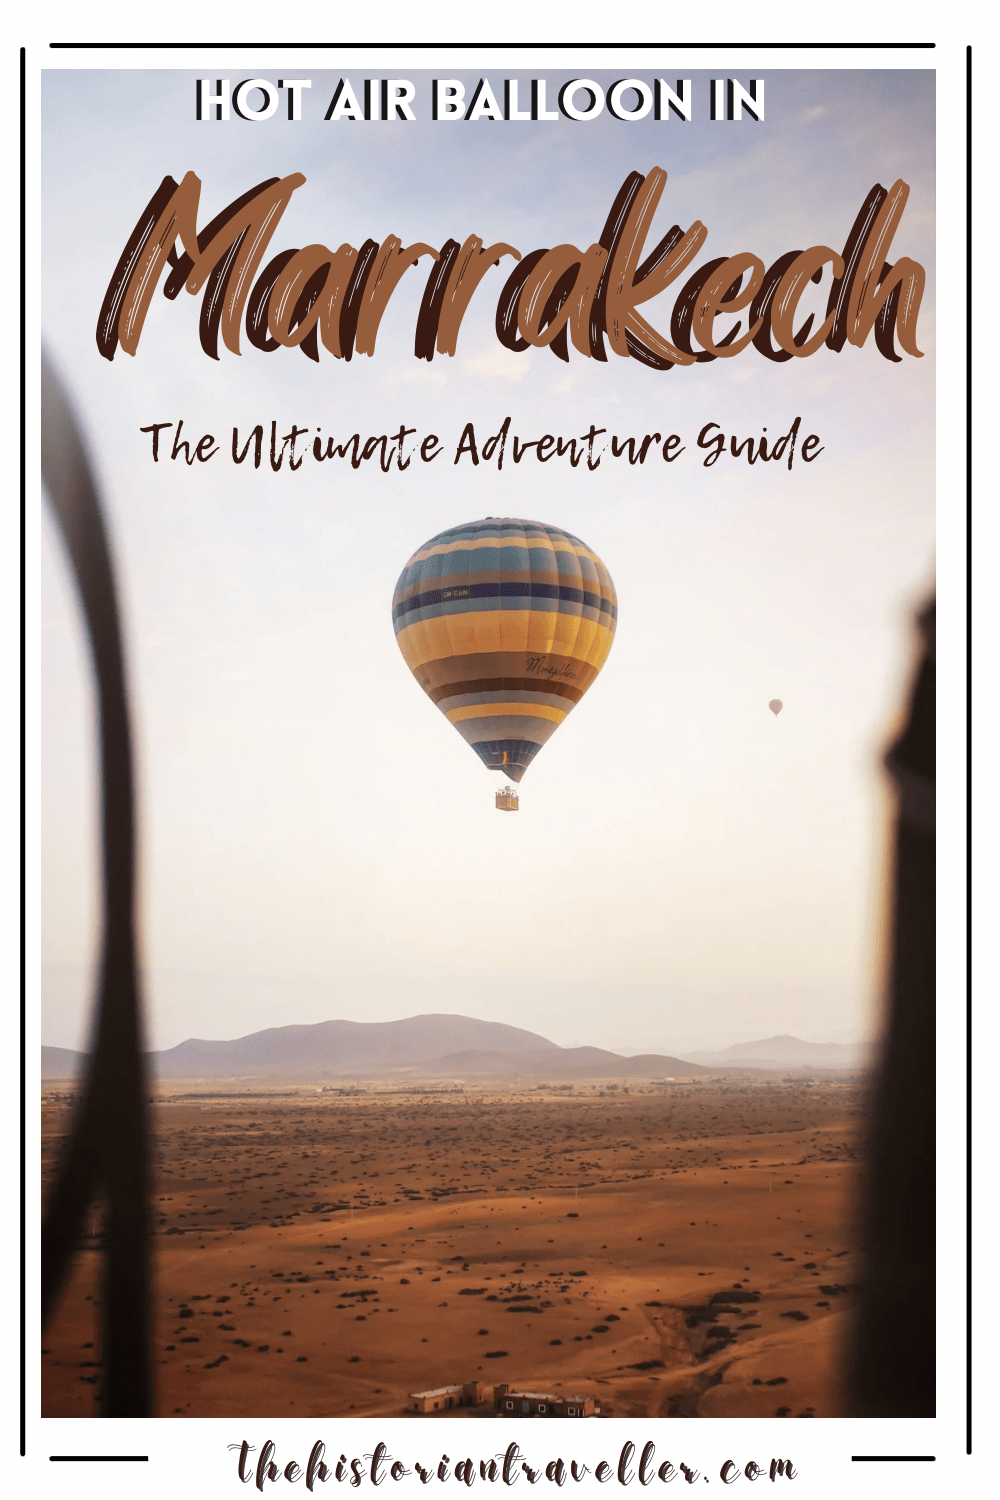 Hot Air Balloon in Marrakech. The ultimate adventure guide